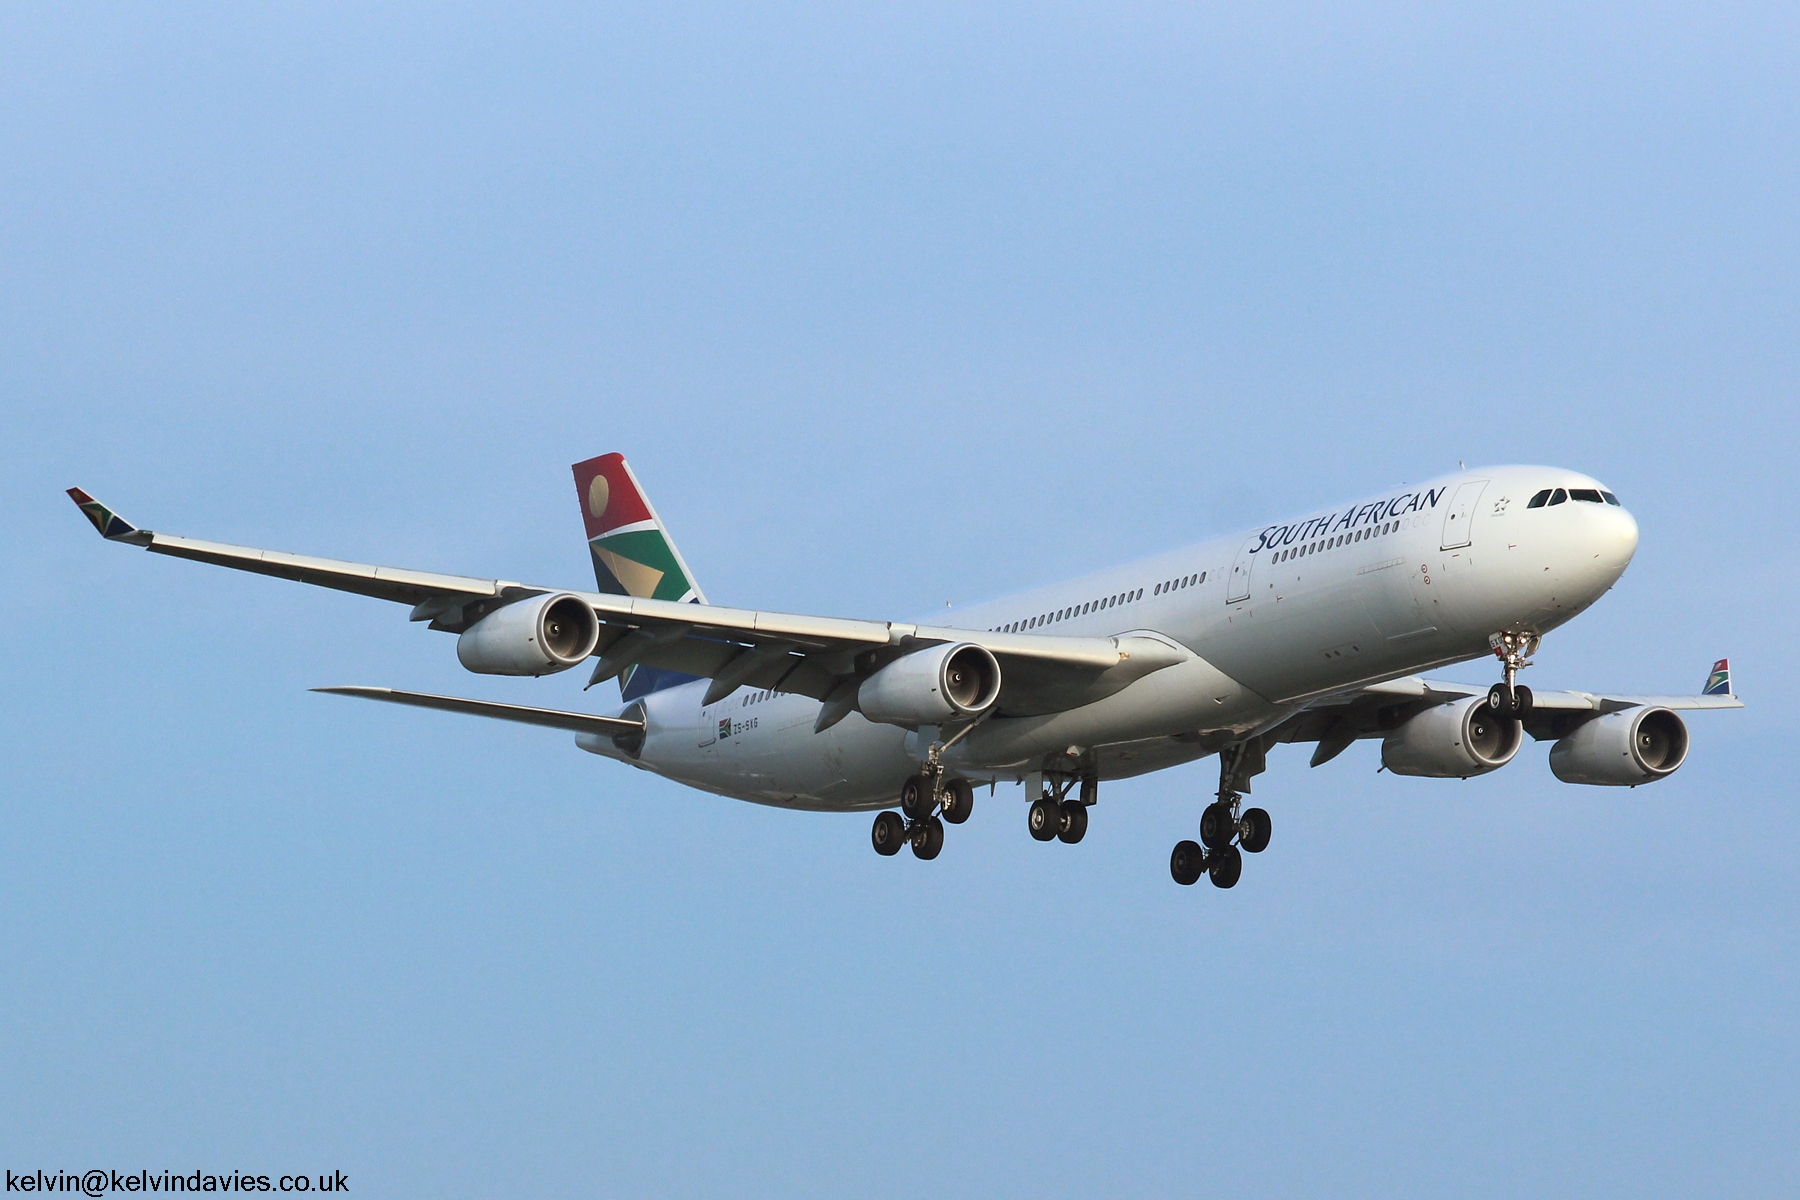 South African Airways A340 ZS-SXG